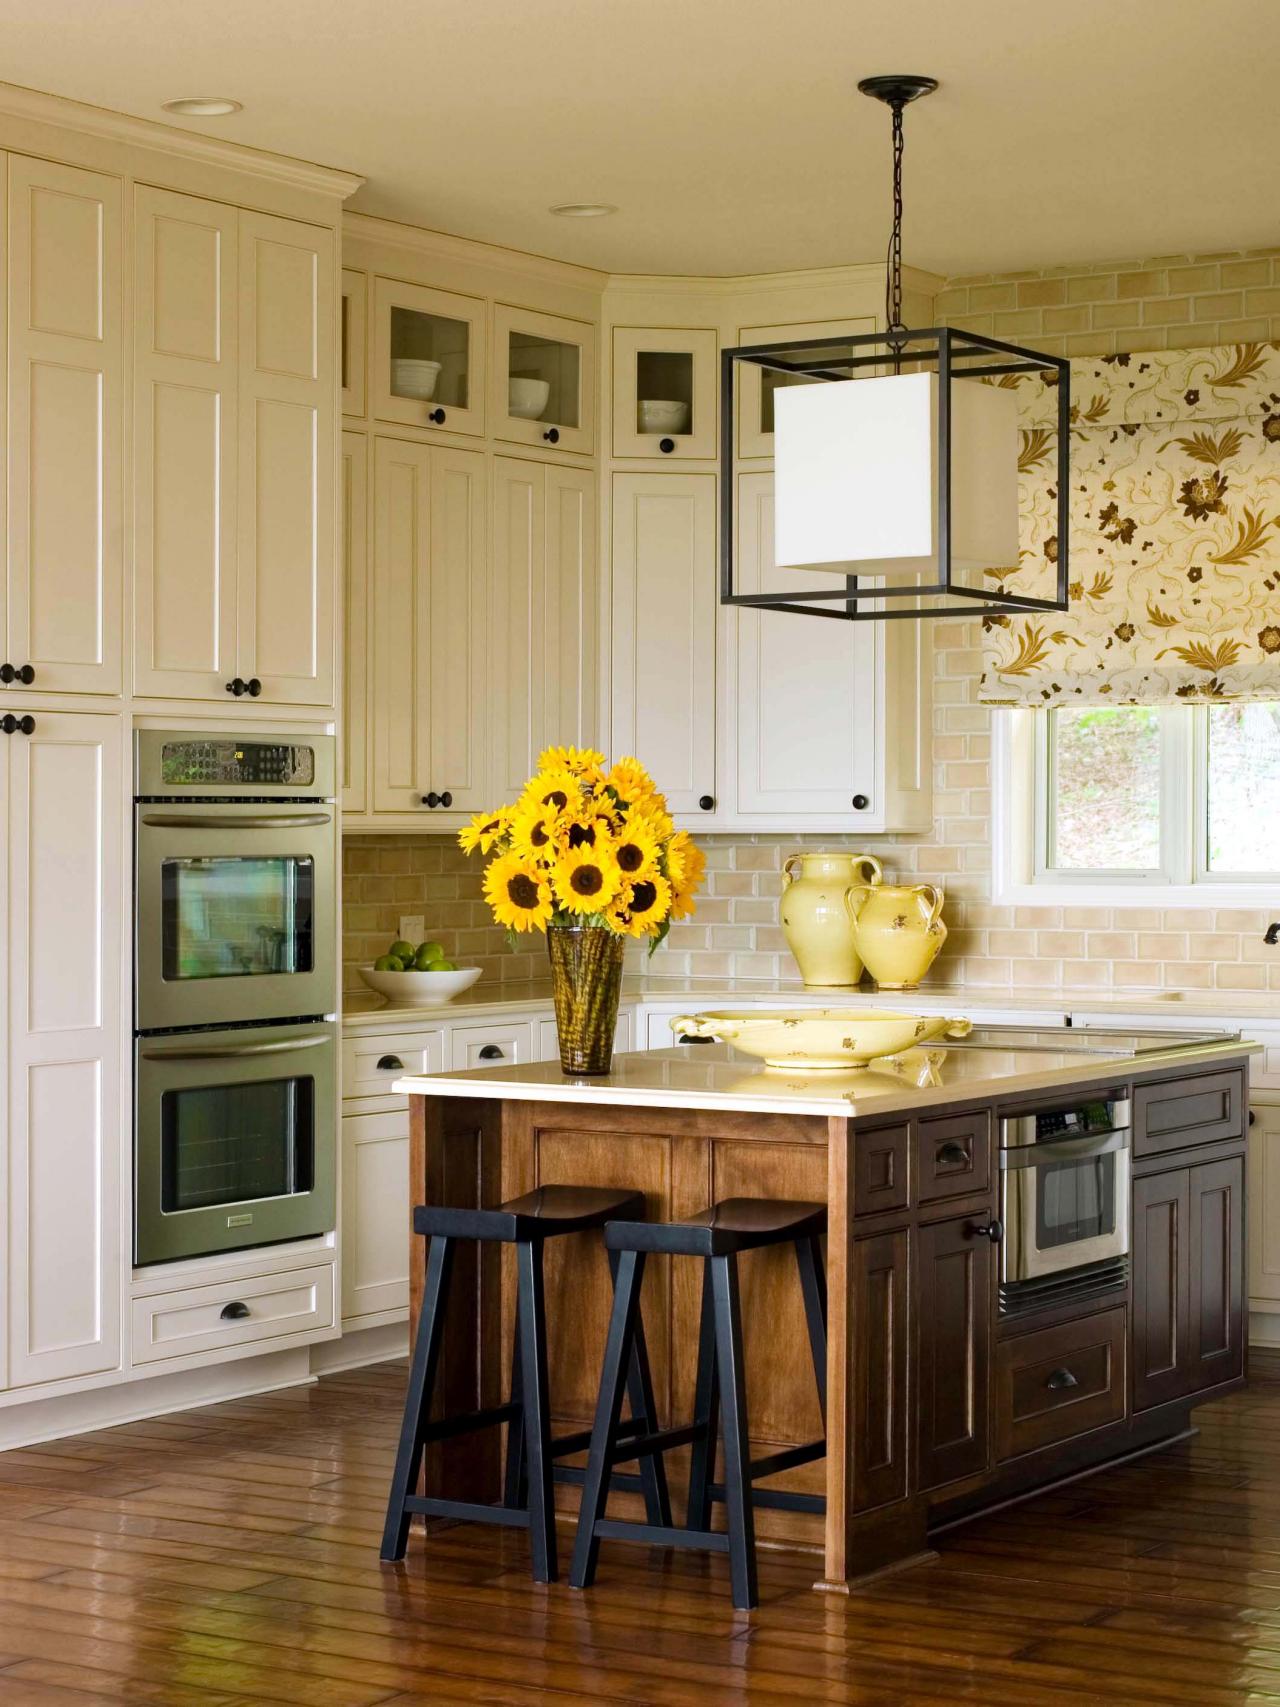 Resurfacing Kitchen Cabinets Pictures Ideas From HGTV HGTV